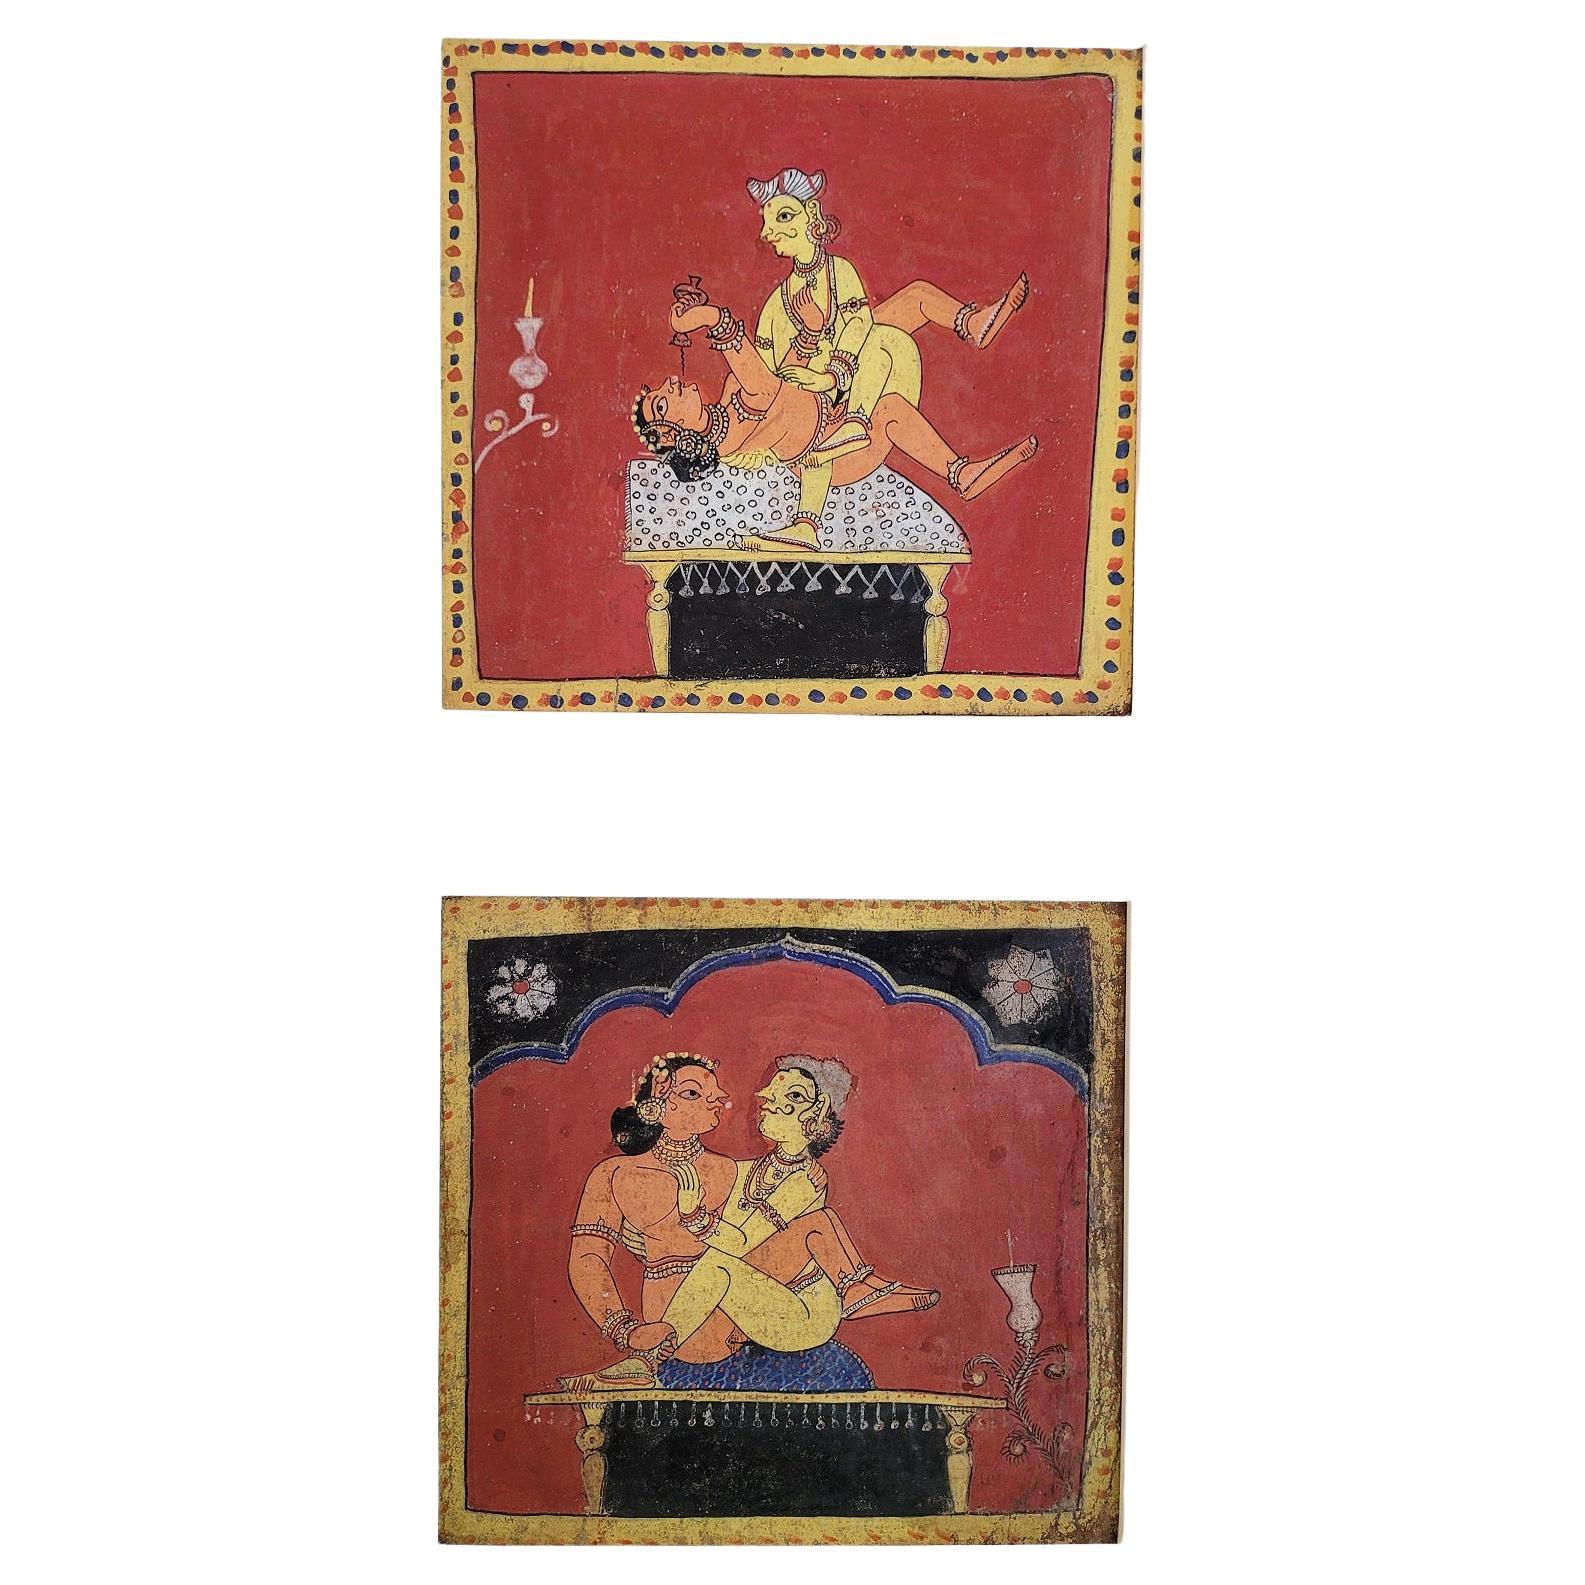 Pair of Indian Erotic Paintings from a Kama Sutra Series